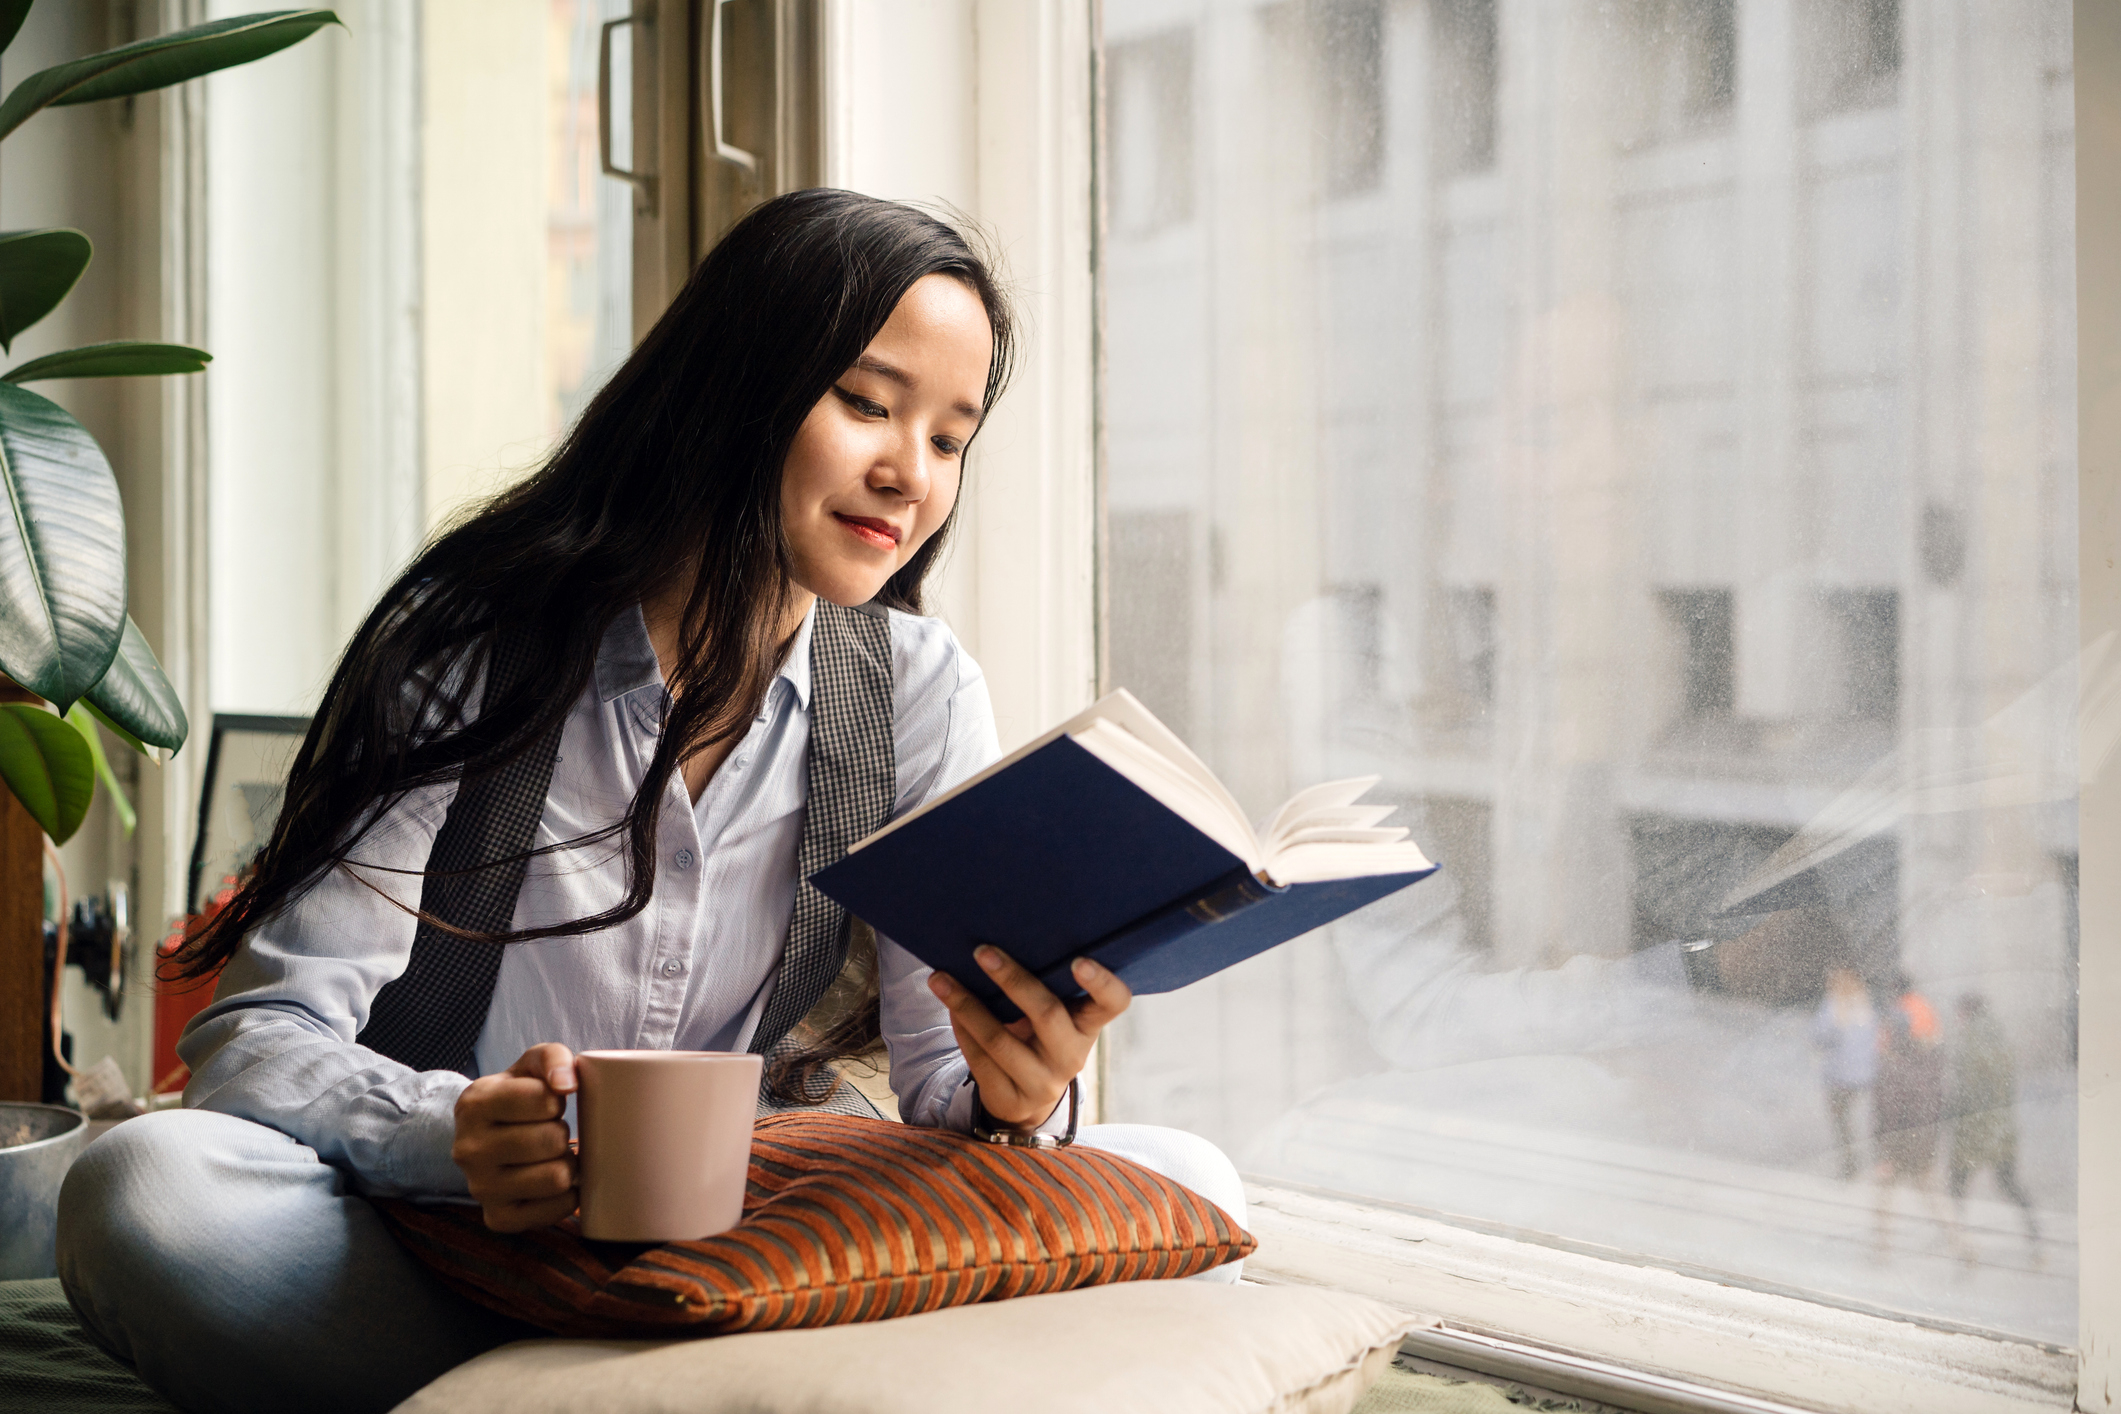 A woman with long hair reads a book by a window while holding a mug